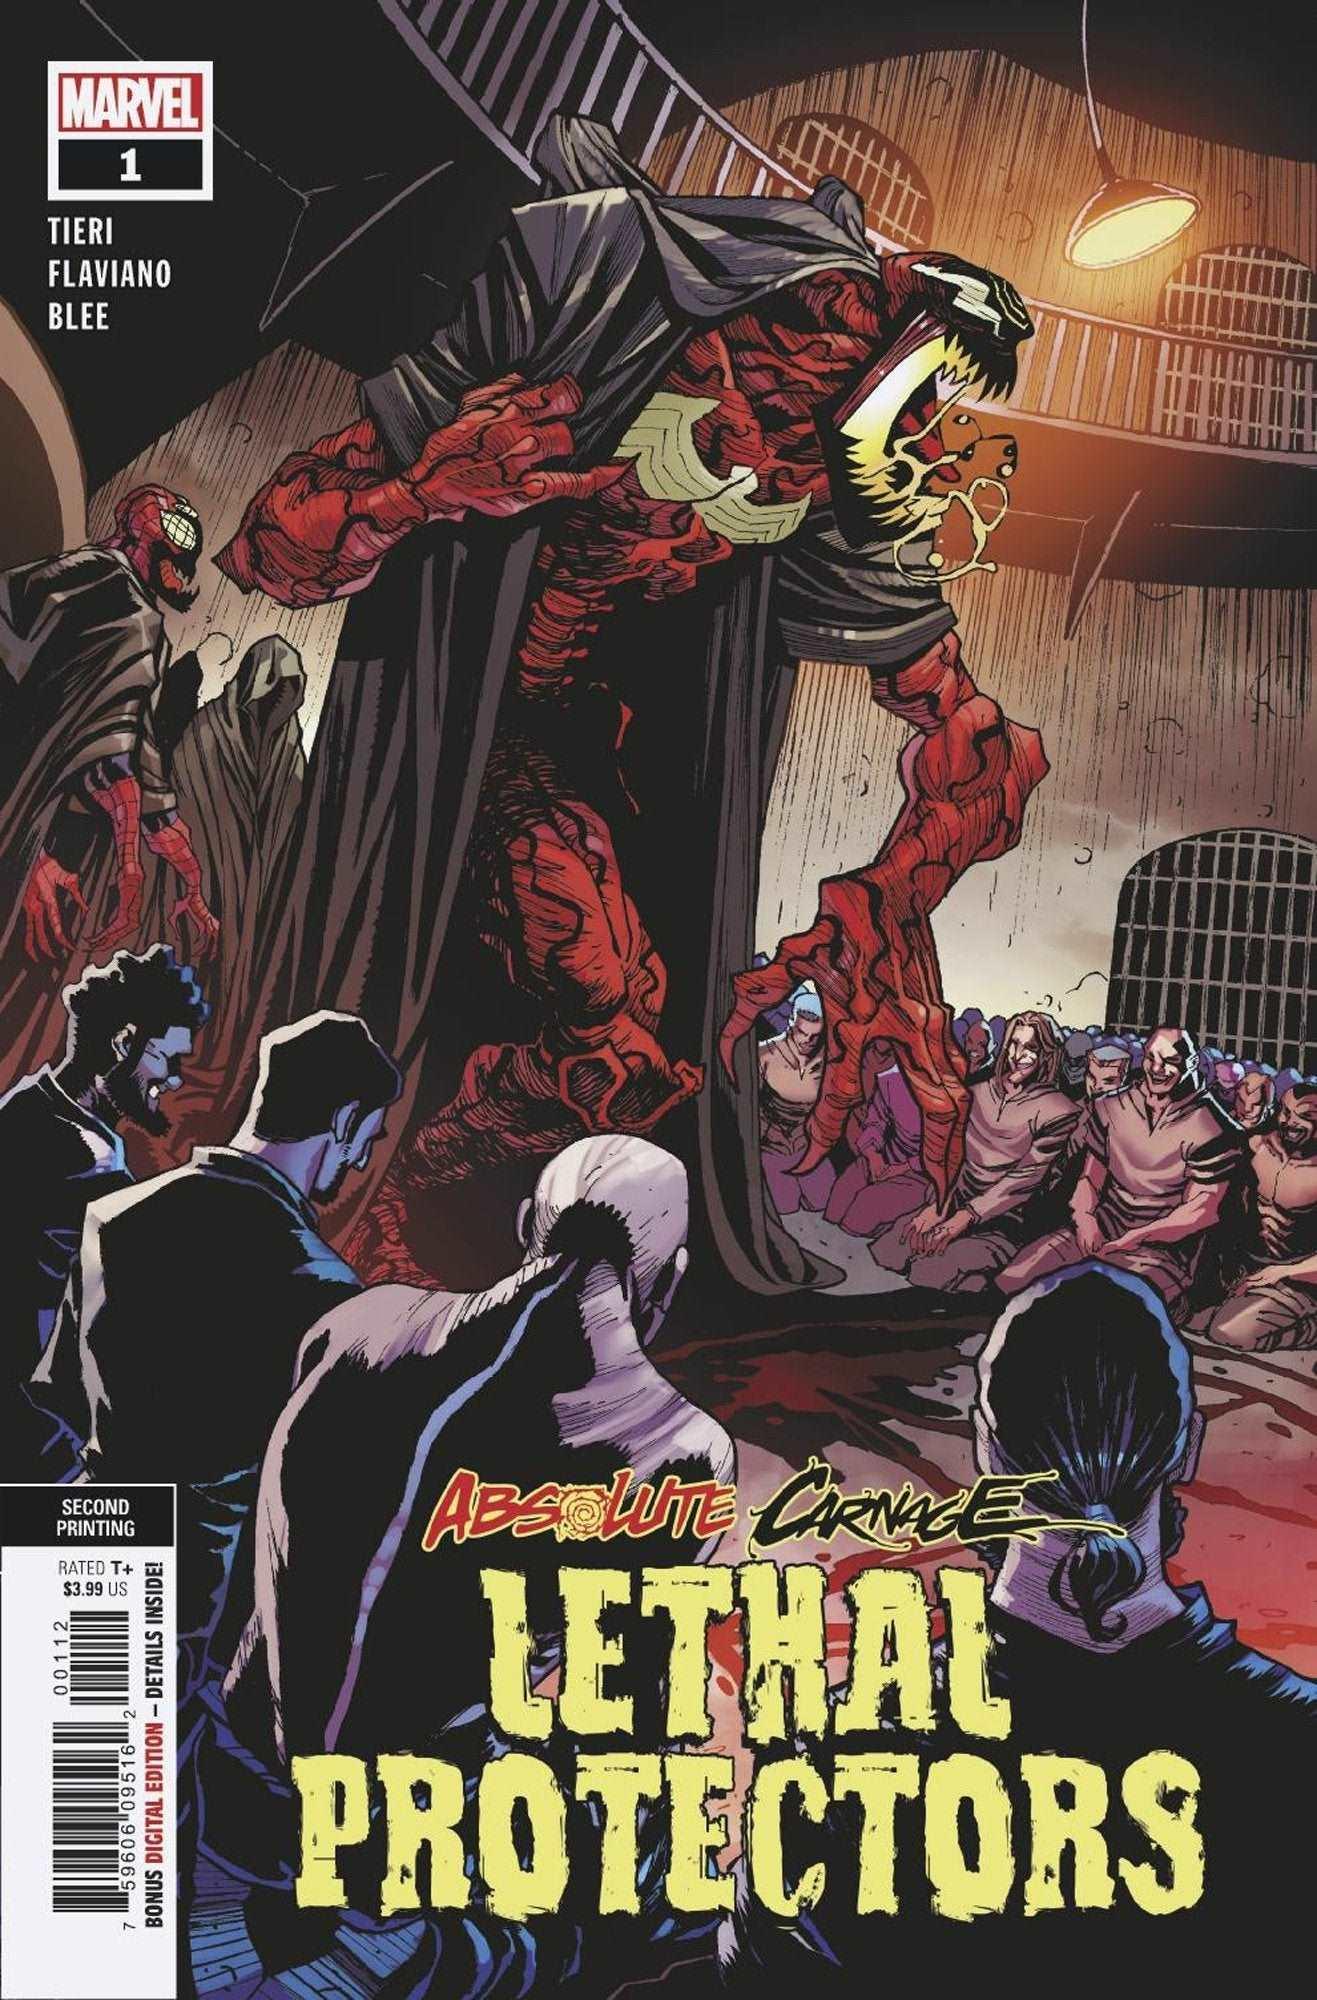 ABSOLUTE CARNAGE LETHAL PROTECTORS #1 (OF 3) 2ND PTG VAR AC 10/23/2019 - PCKComics.com